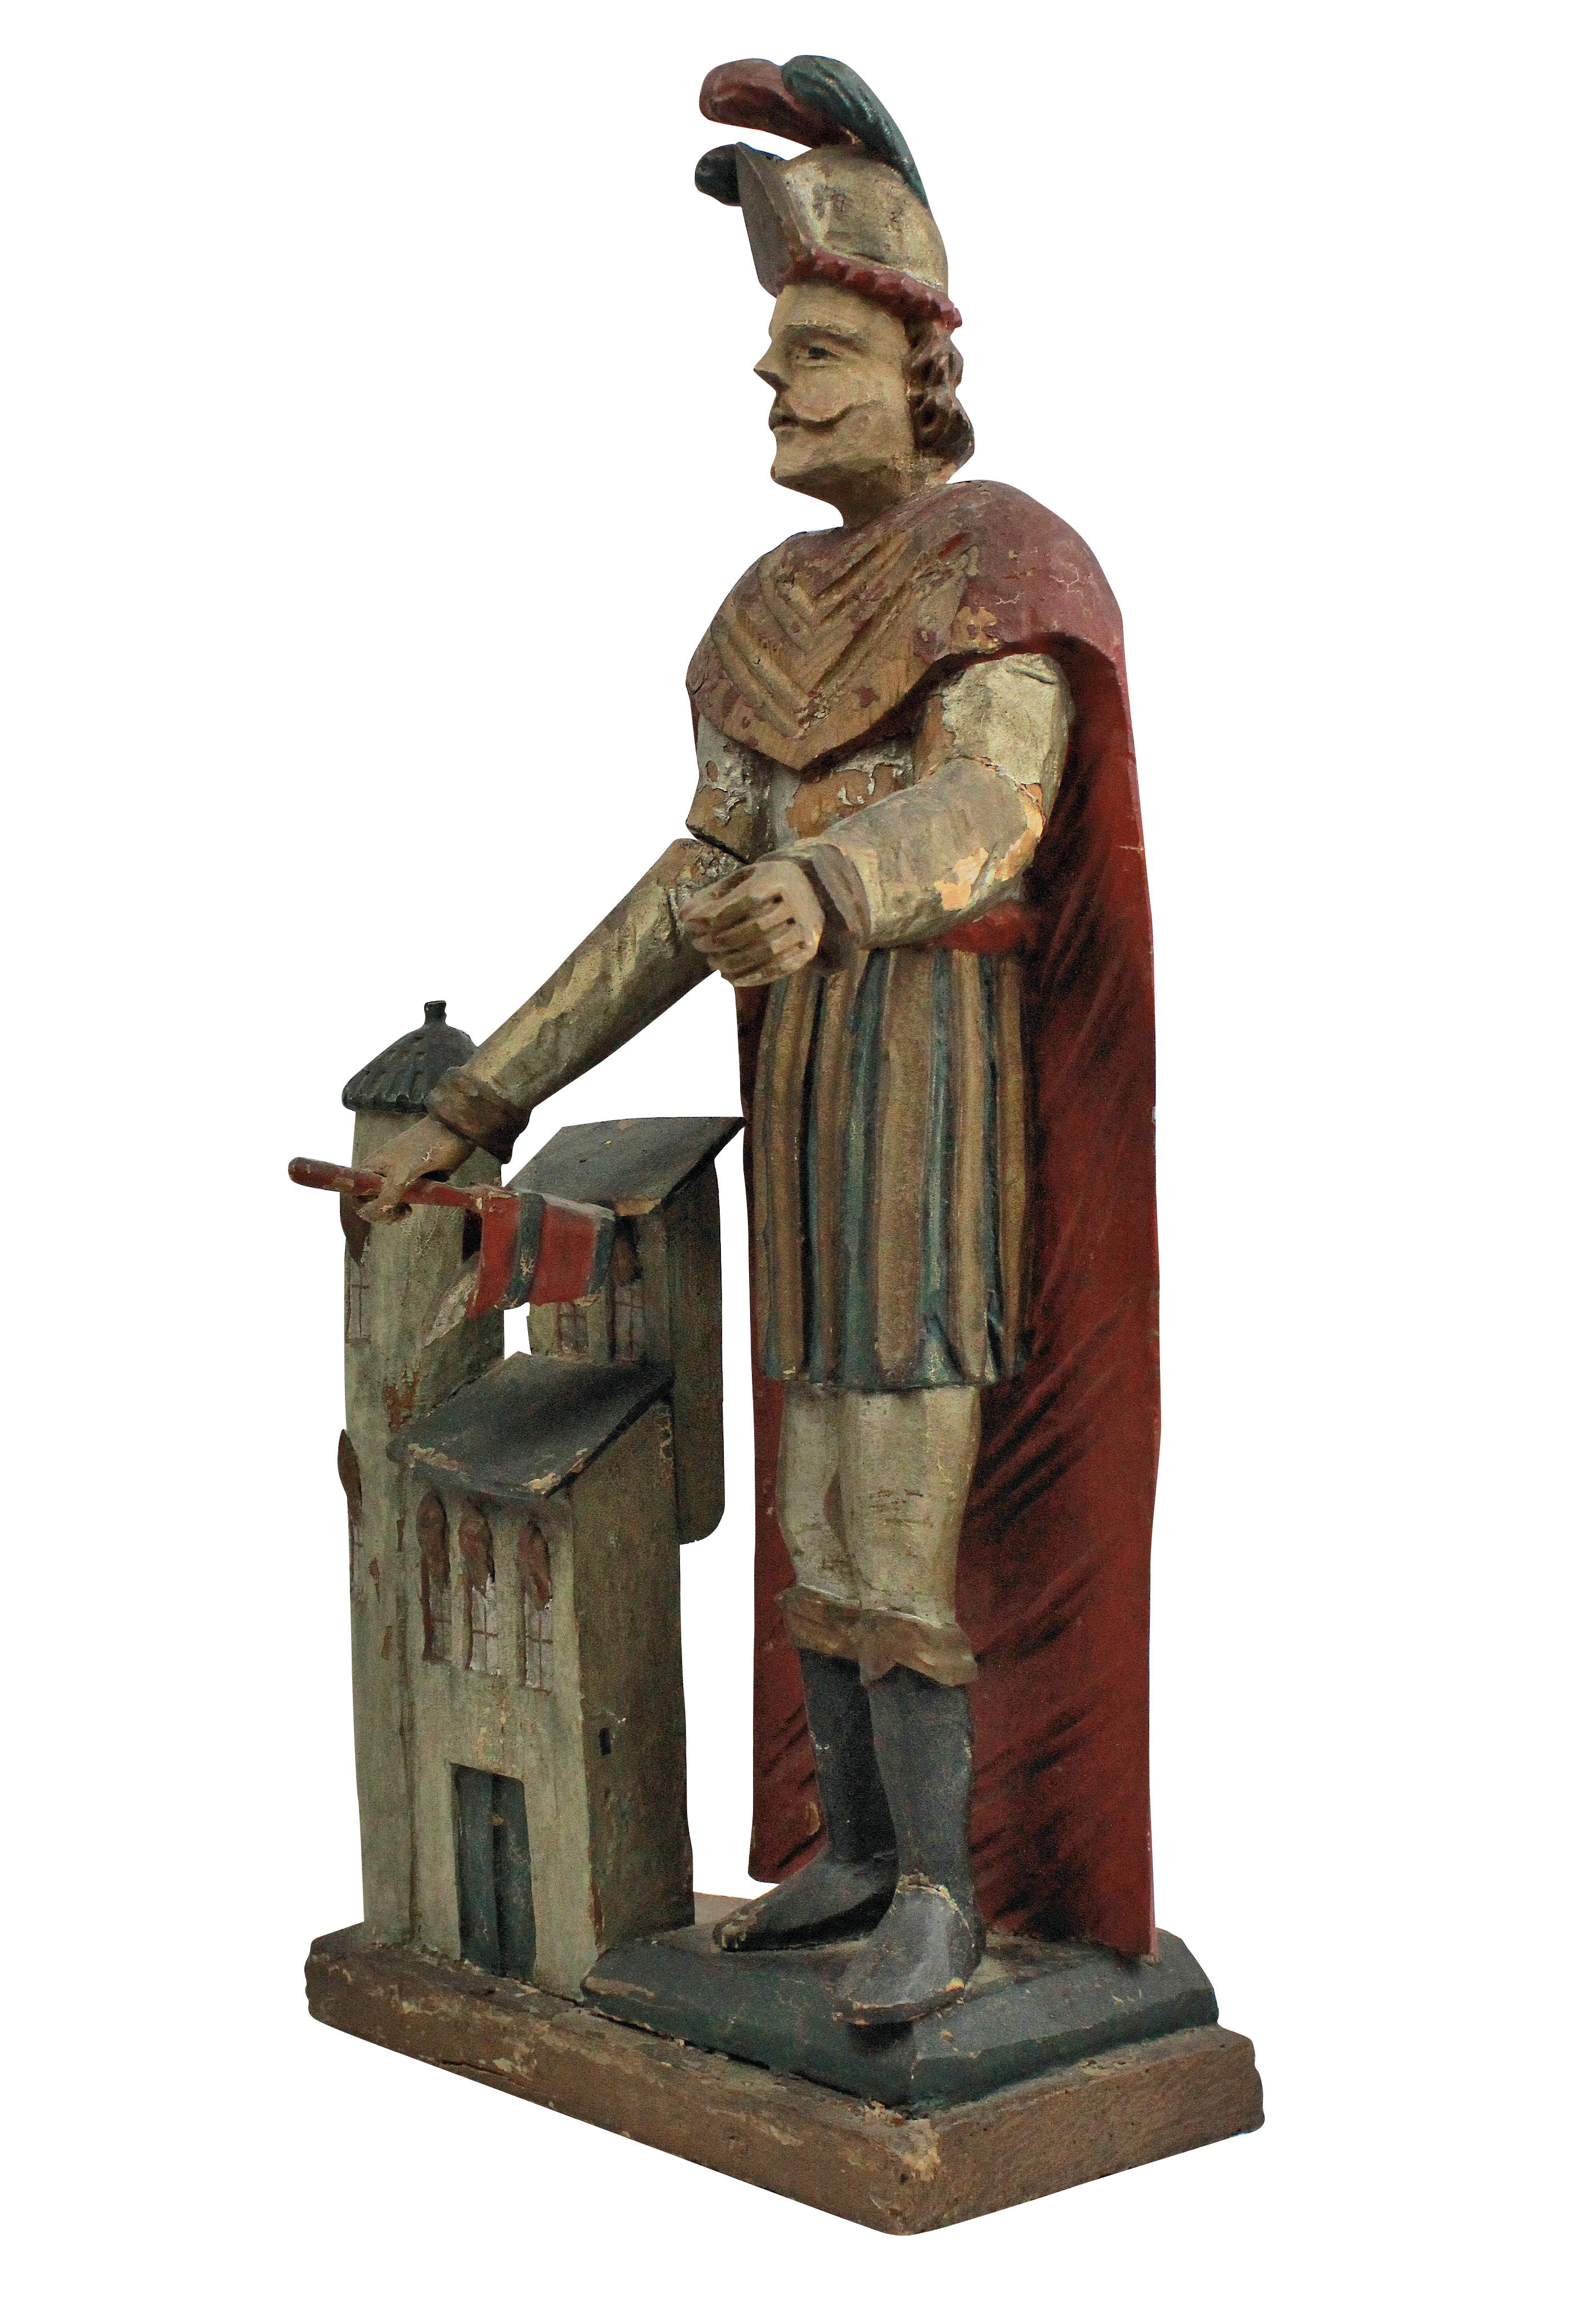 A French late 18th century statue of St Florian, in carved fruitwood with polychrome paints. Missing his spear.

The Patron Saint of Austria, chimney sweeps, fire fighters and brewers.